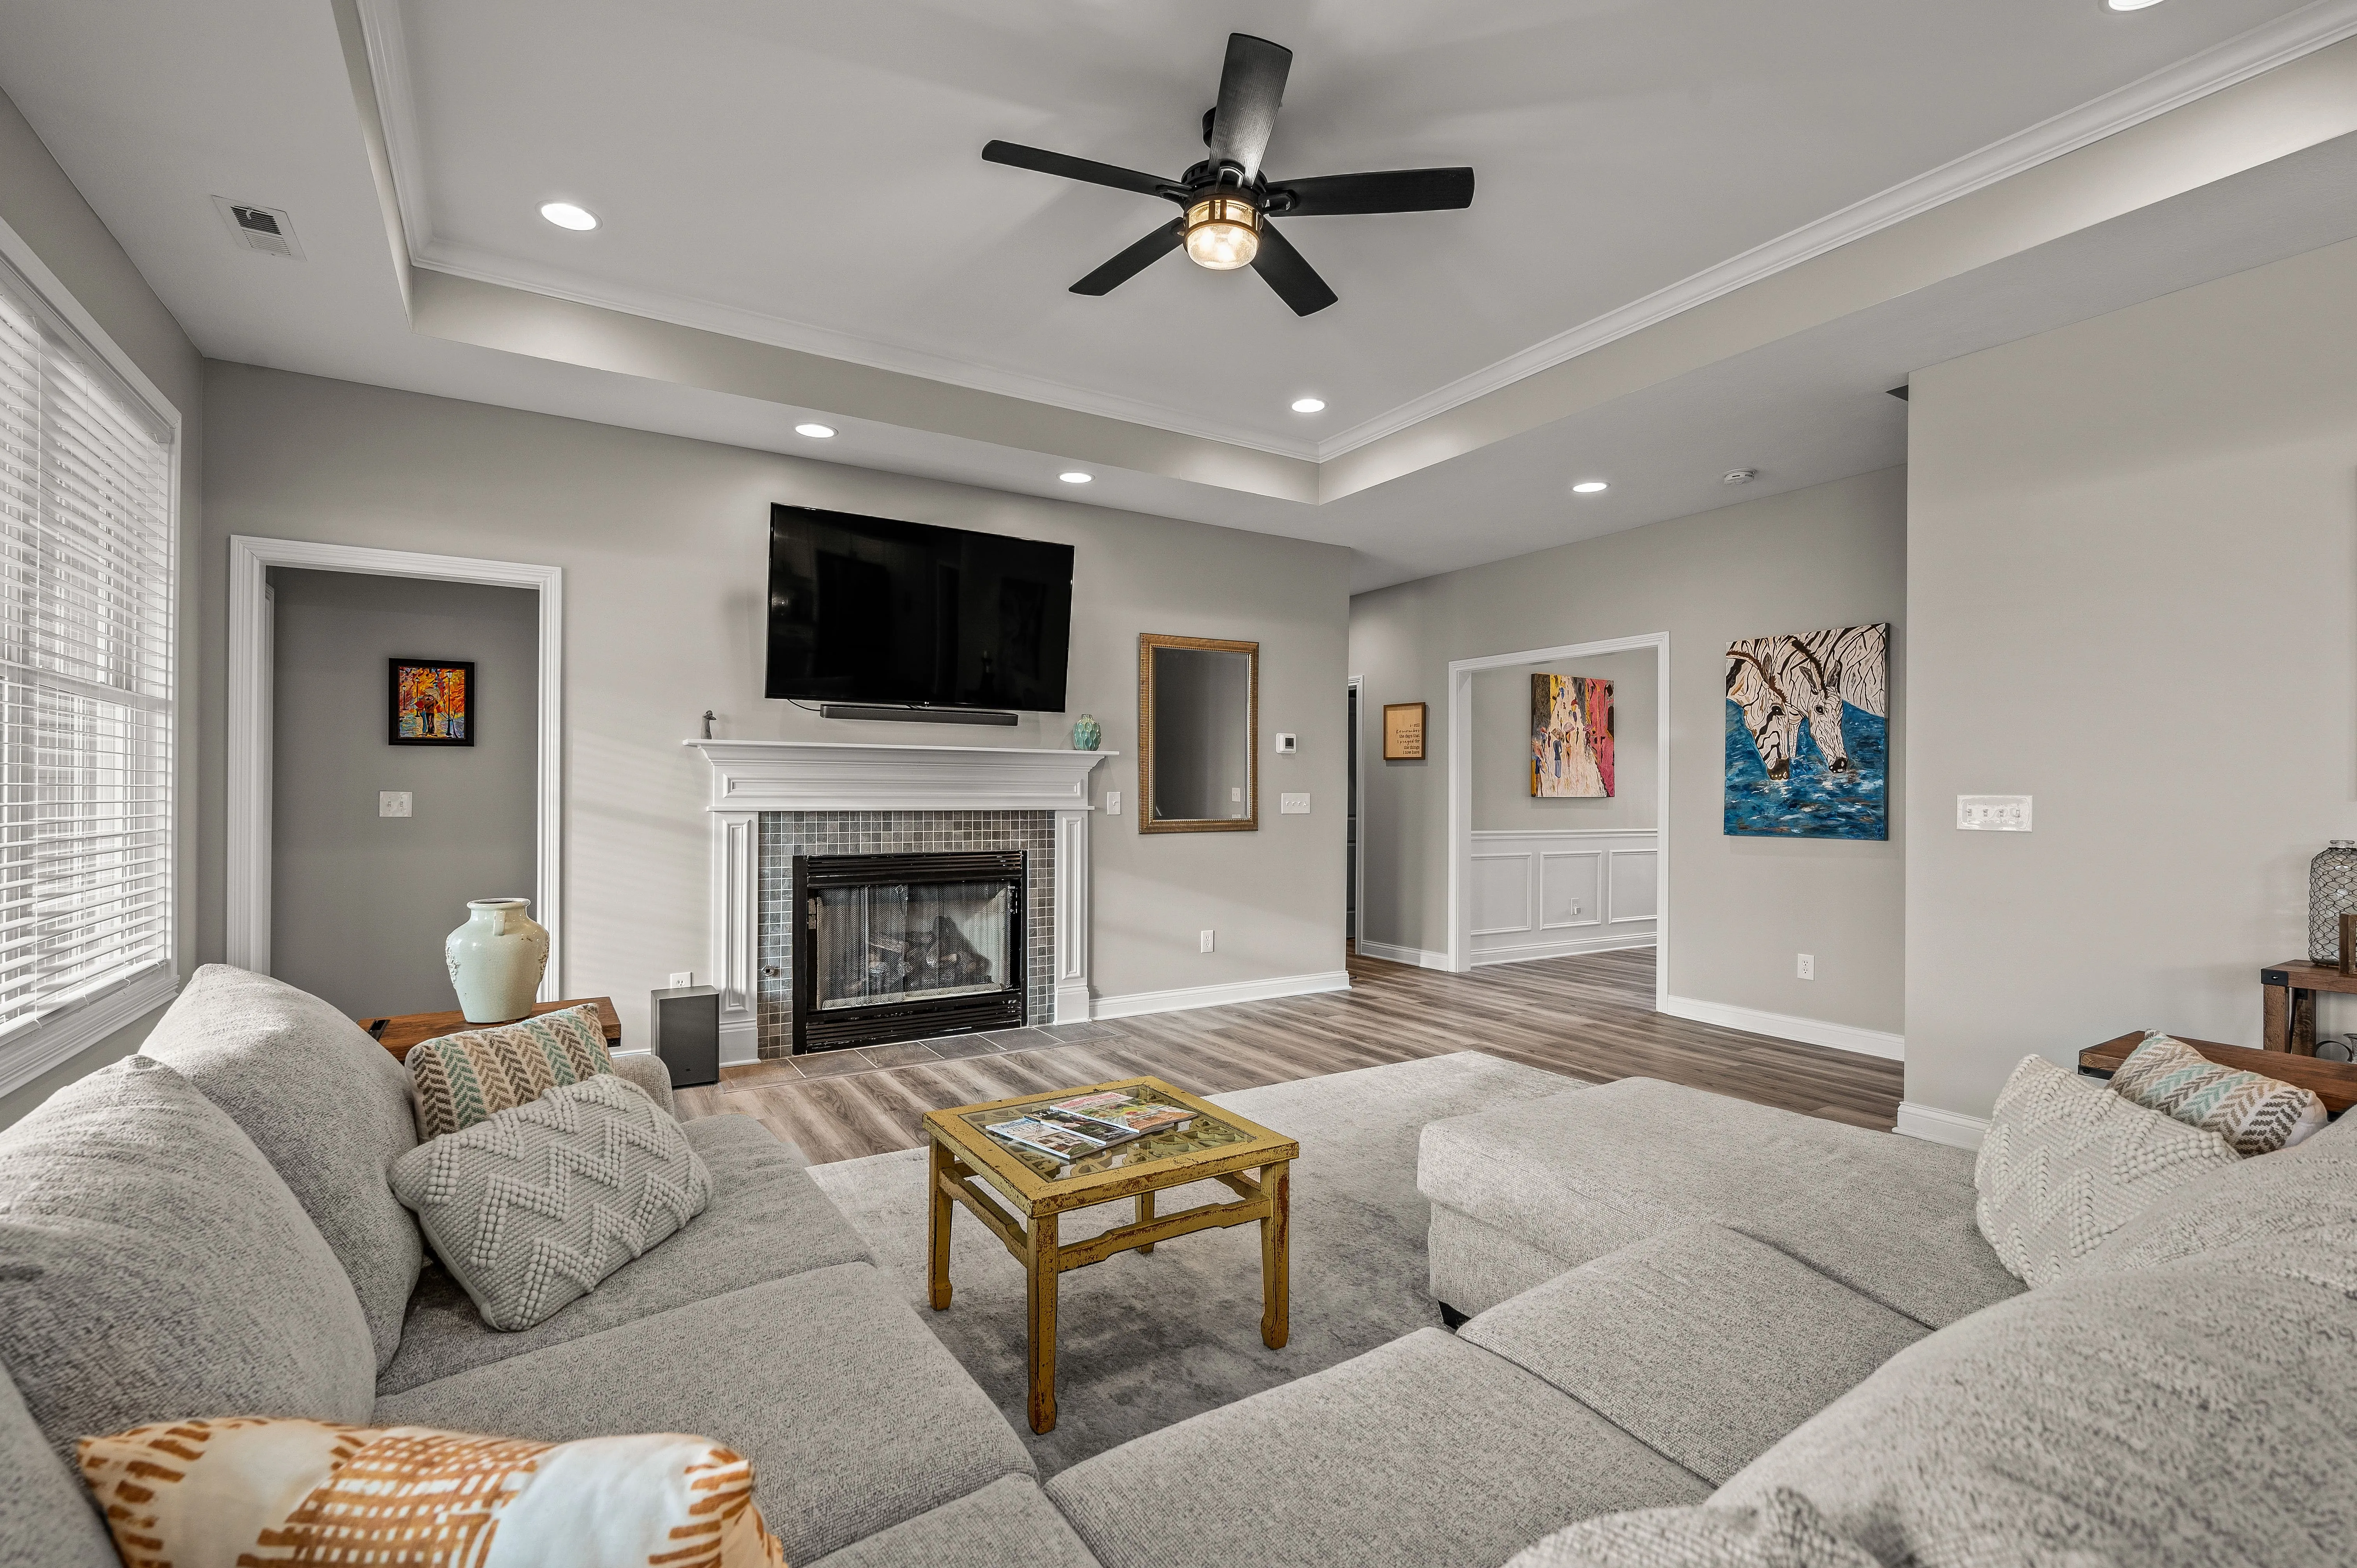 Spacious modern living room with gray sectional sofa, hardwood floors, white fireplace, ceiling fan, and wall-mounted television.